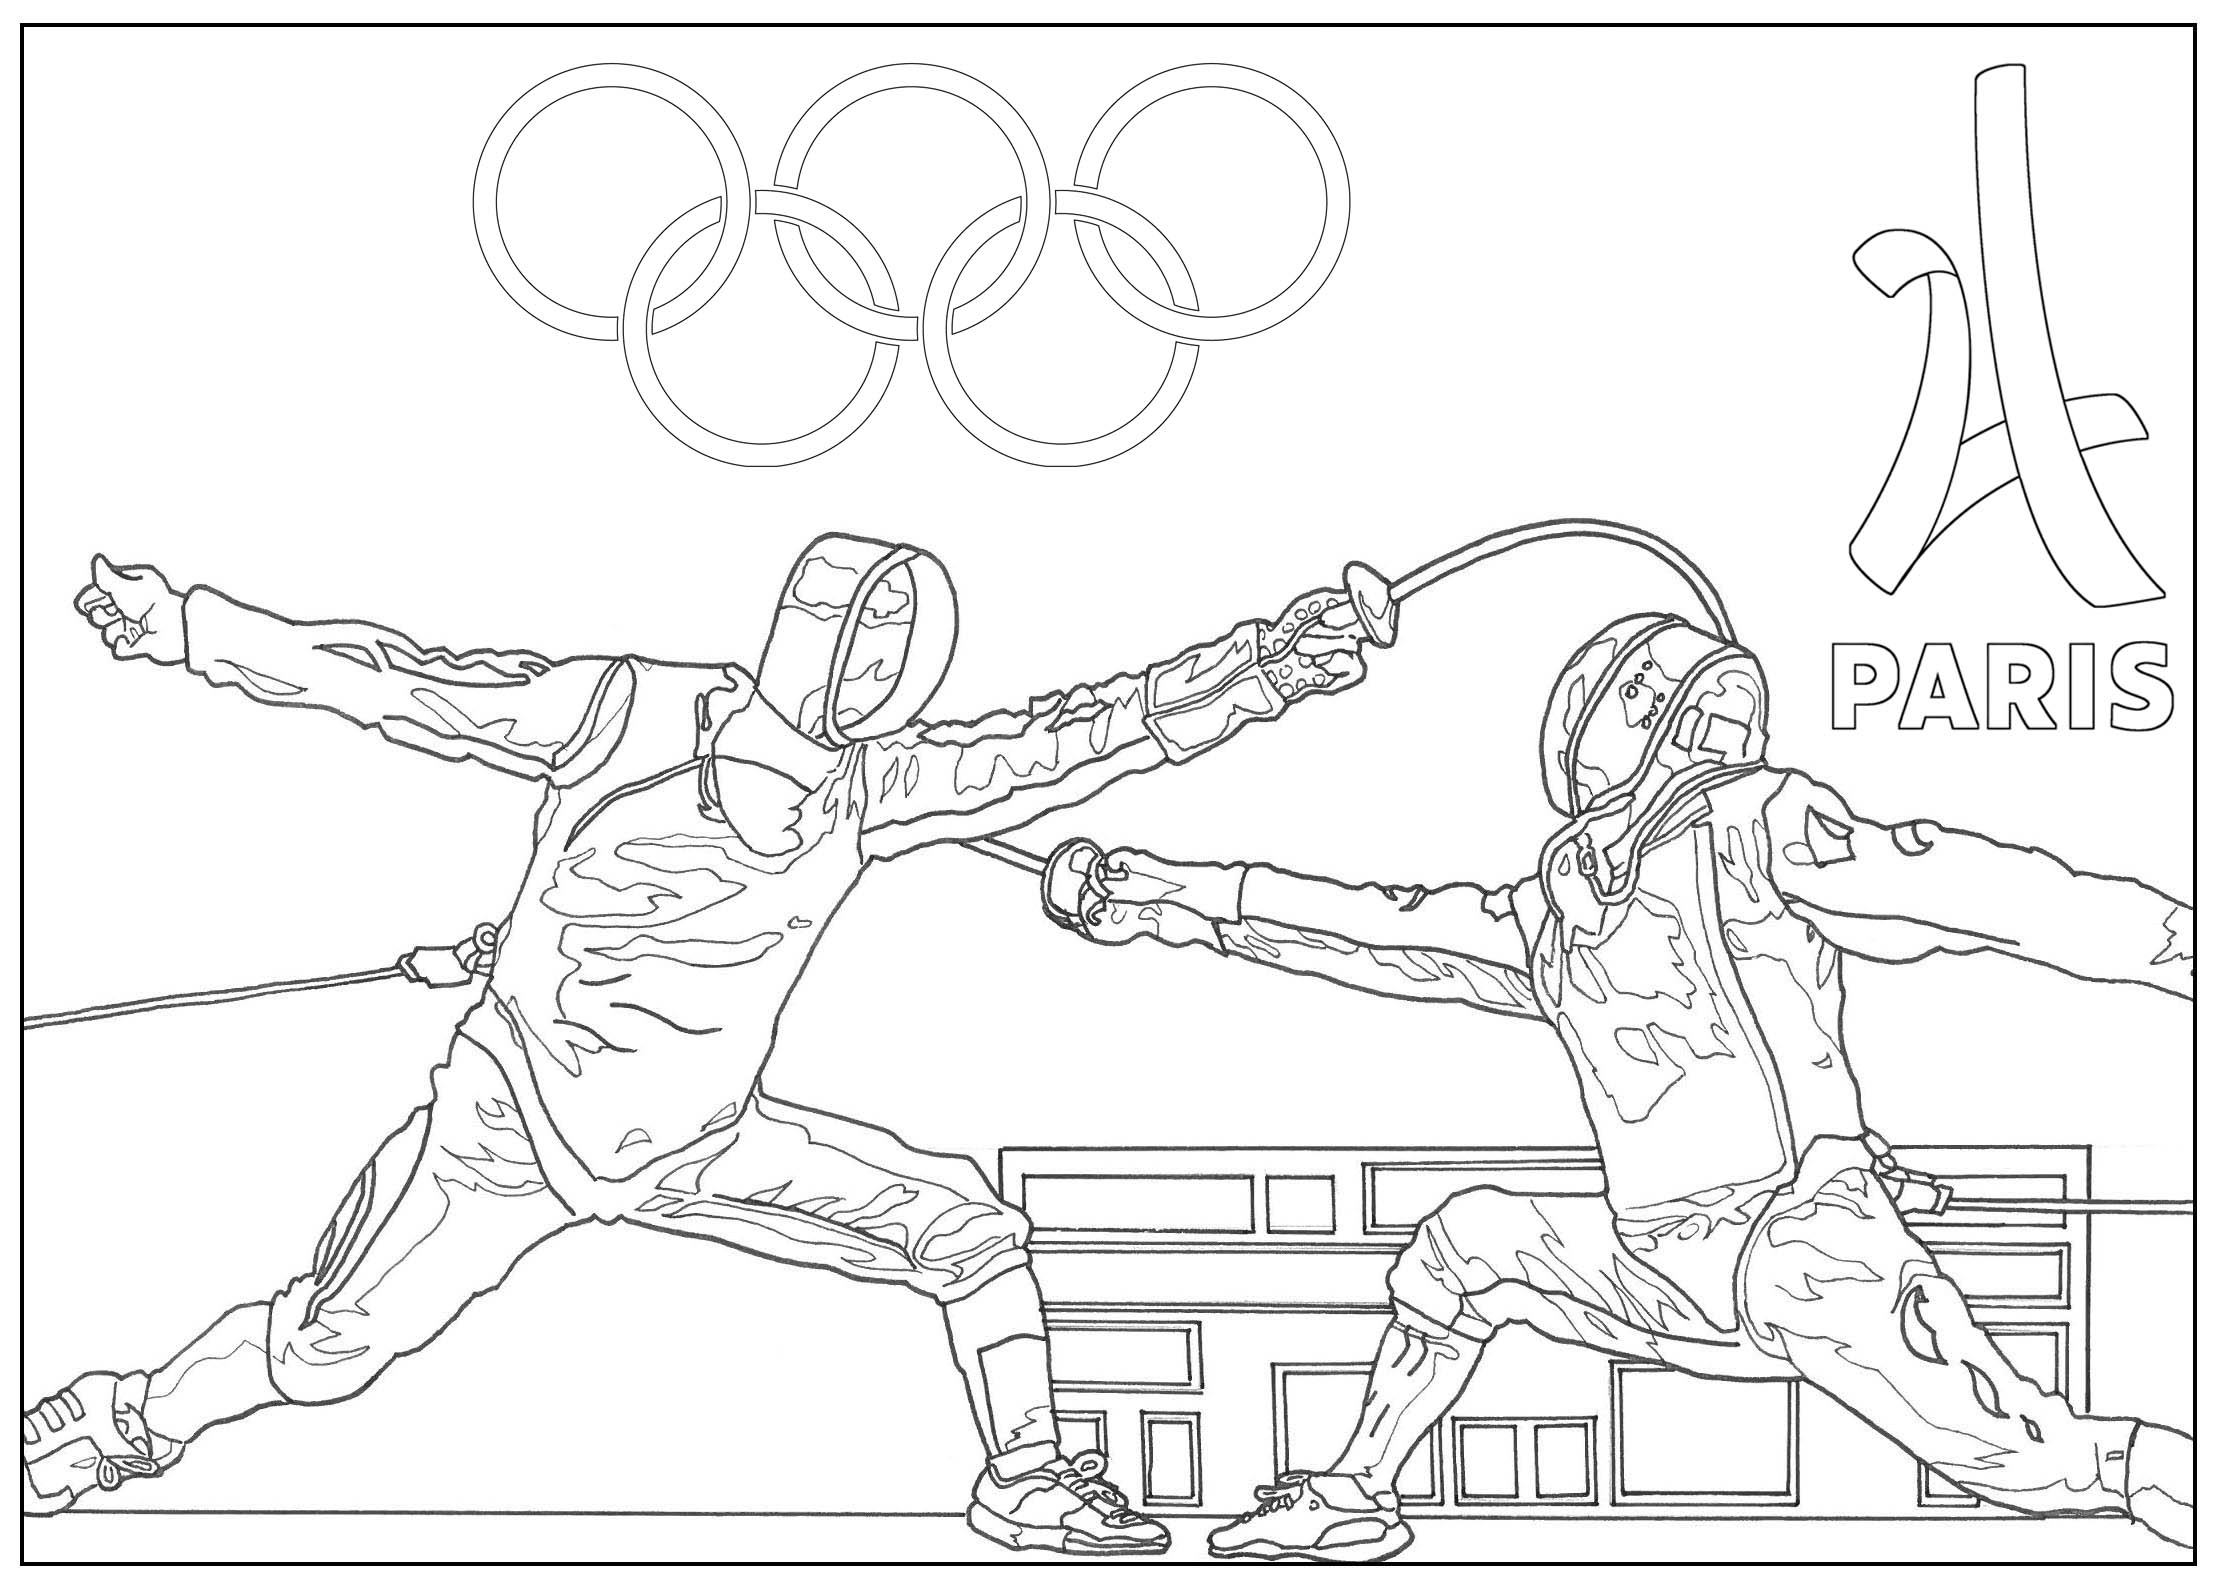 Olympic Games coloring page to download